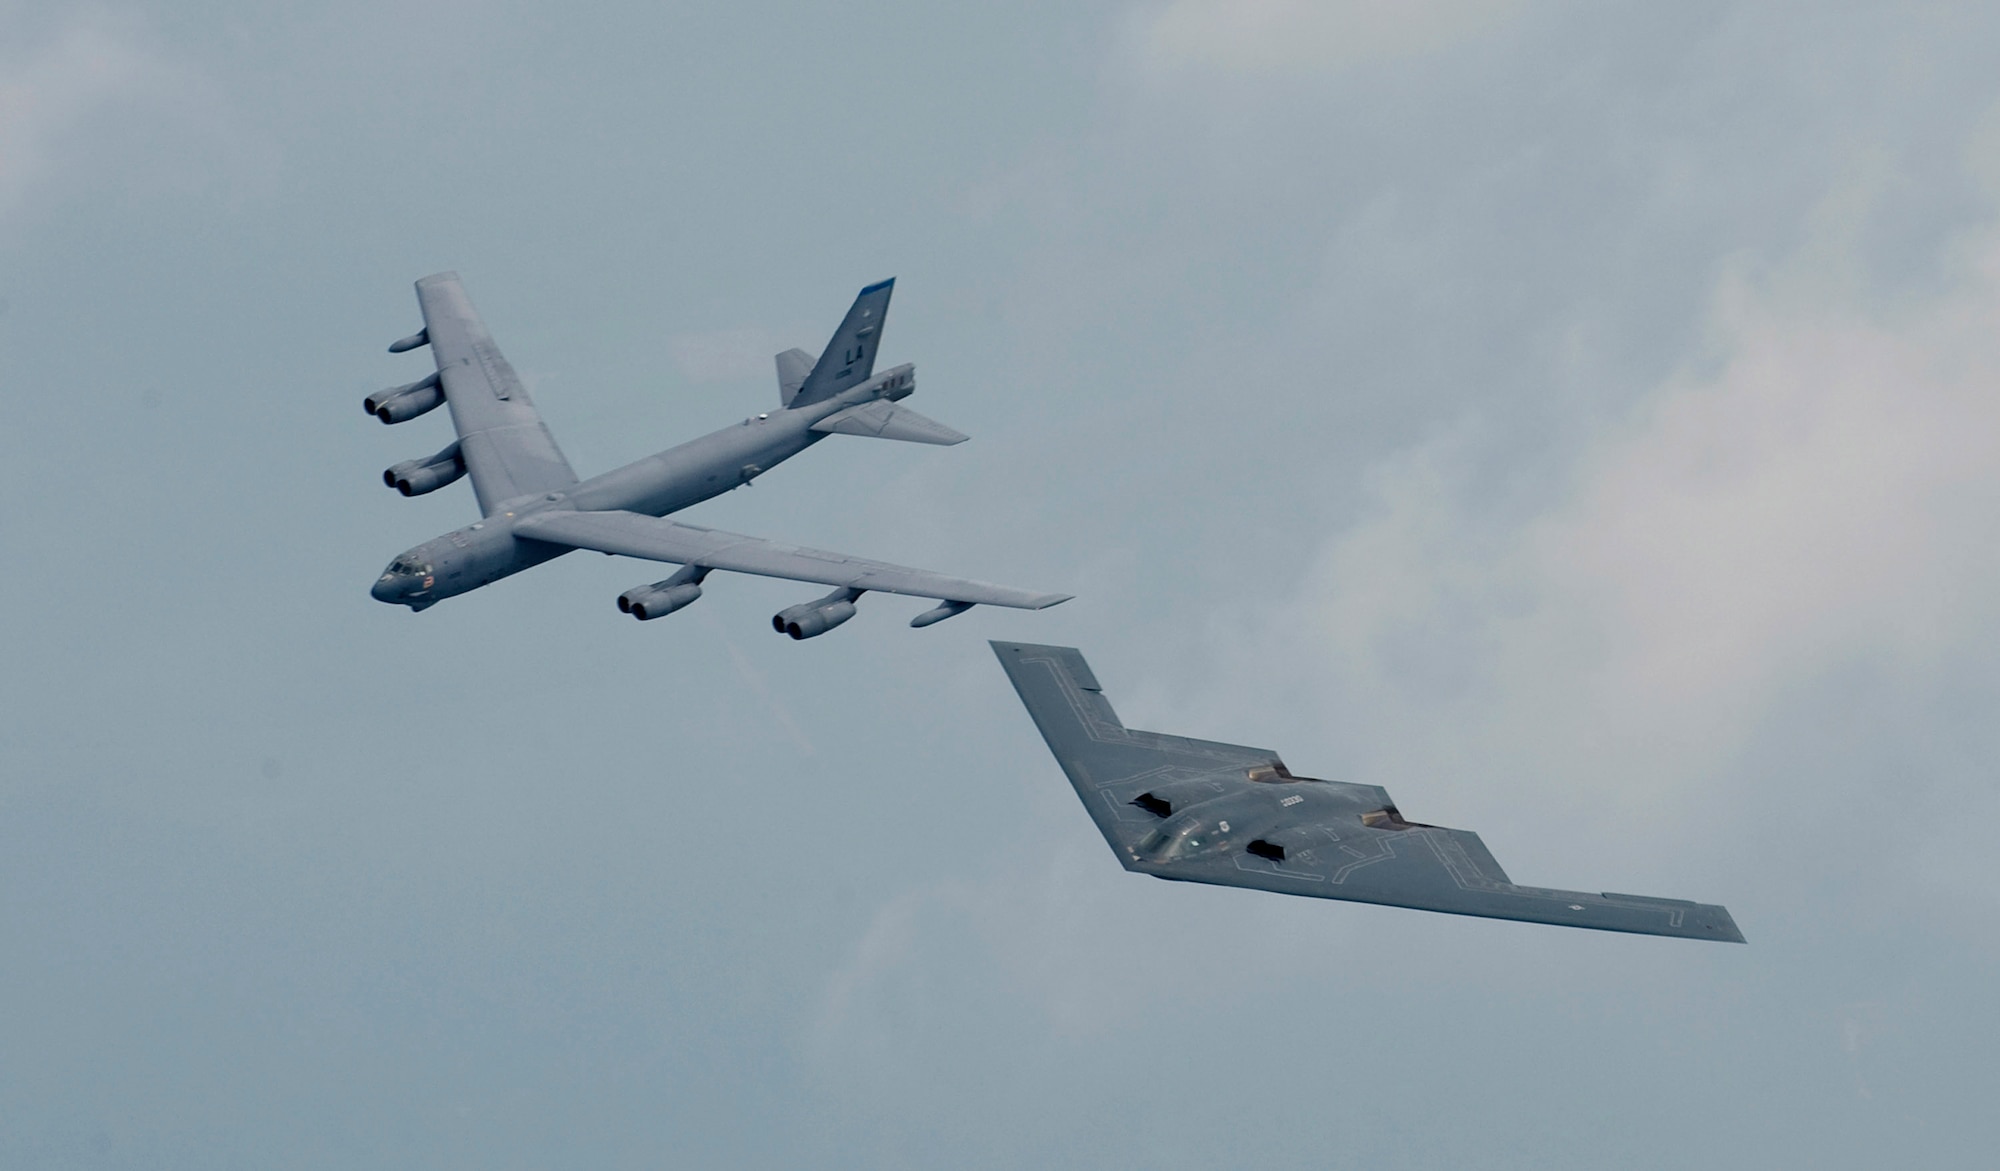 A B-2 Spirit and B-52 Stratofortress fly in formation over Shreveport, La., May 10 during the open house and air show at Barksdale Air Force Base, La. The air show featured modern day bombers, and commemorated the 75th anniversary of the base. (U.S. Air Force photo/Staff Sgt. Samuel Rogers)